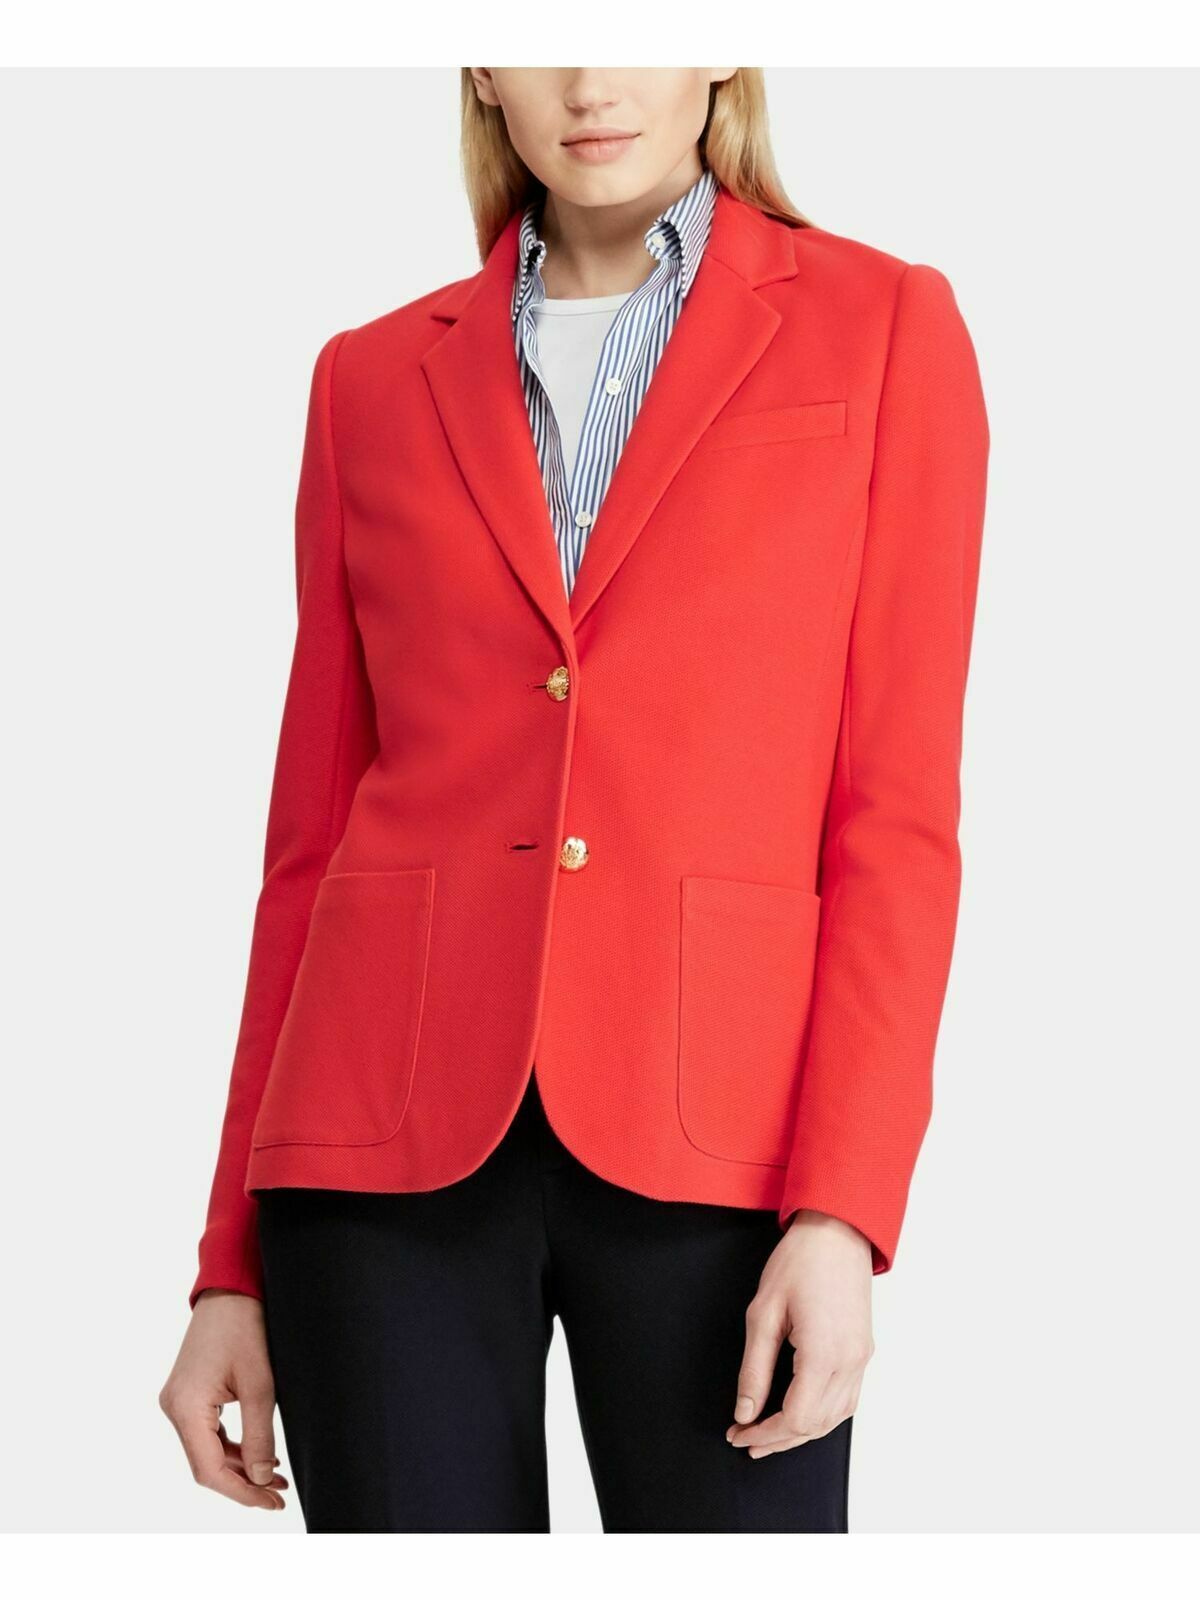 Primary image for Ralph Lauren Textured Knit Cotton Blazer Jacket Red Gold Buttons sz S new